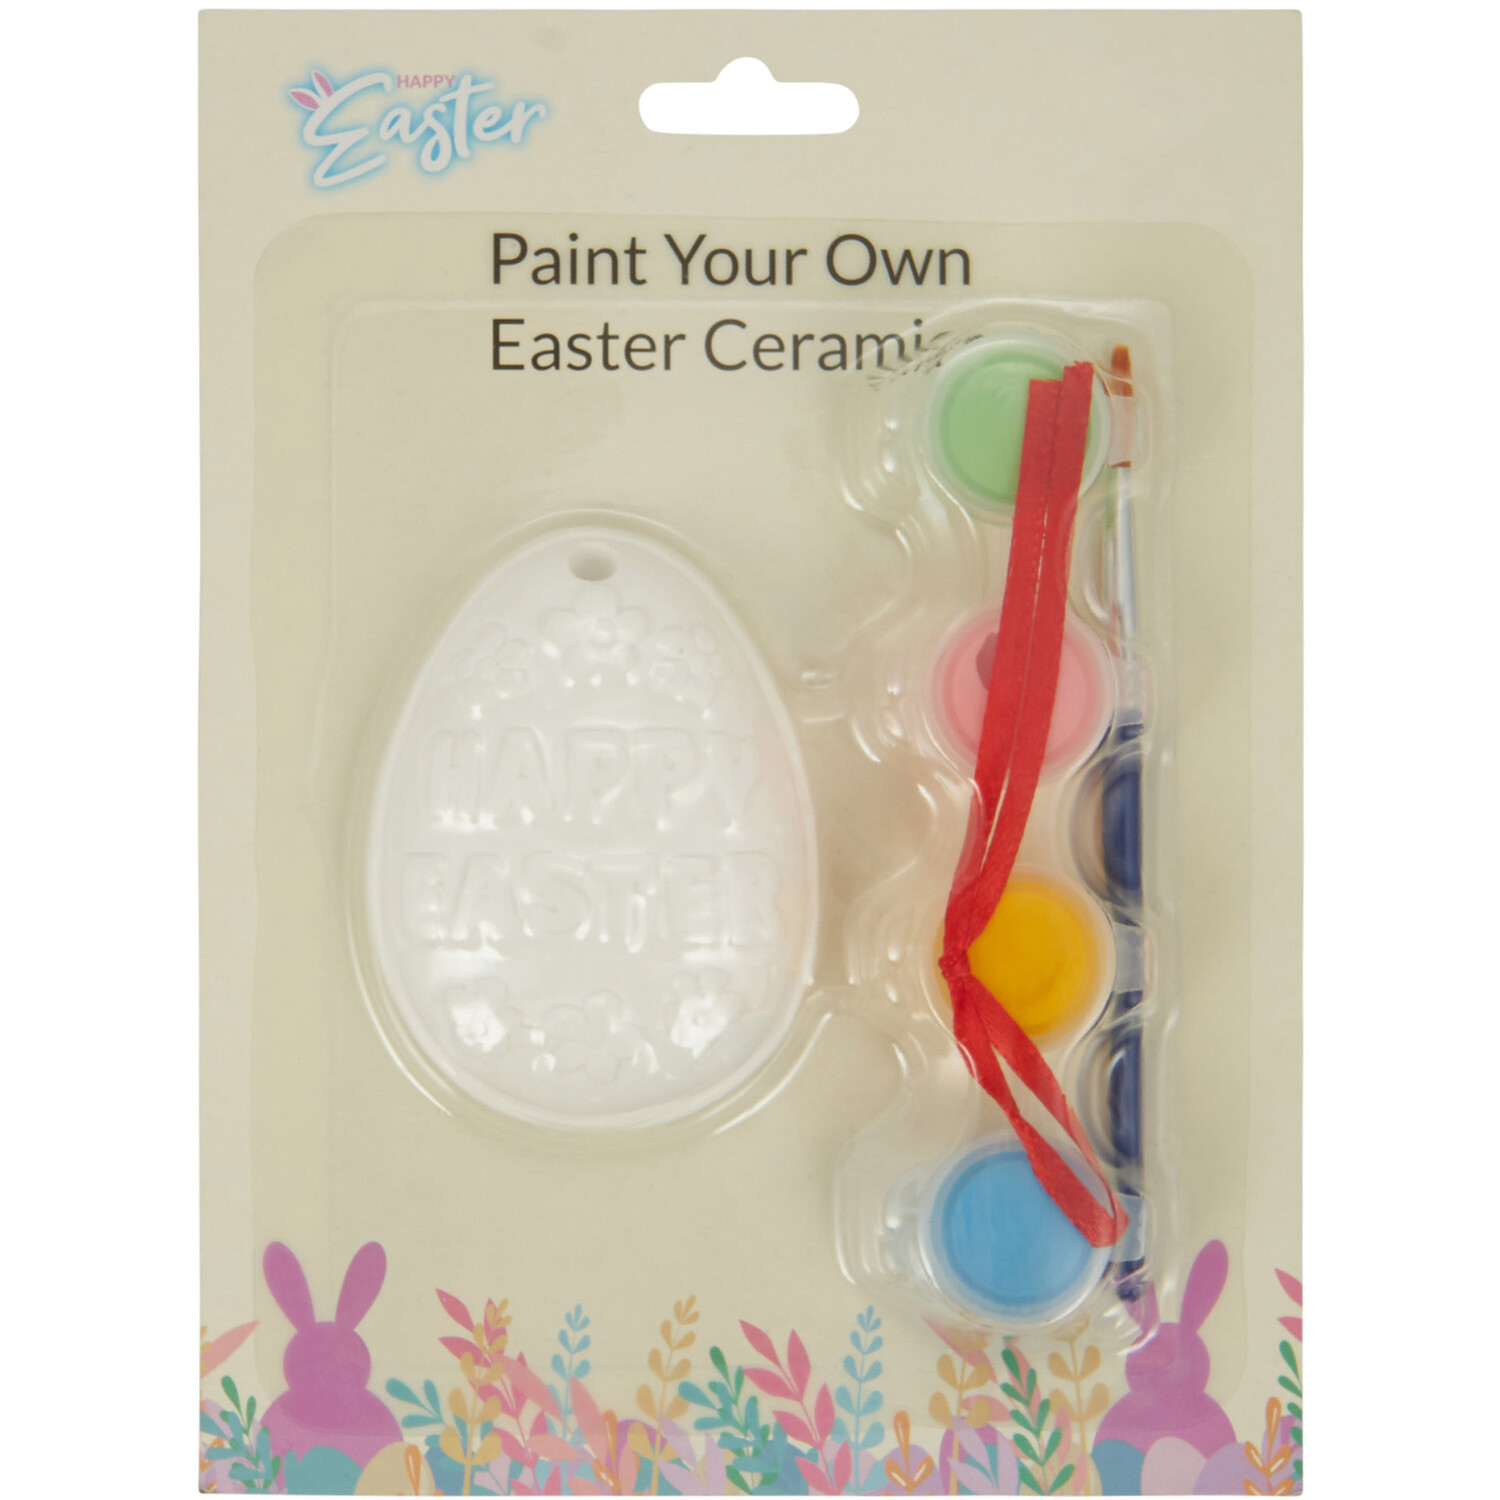 Happy Easter Paint Your Own Easter Ceramics Set Image 2